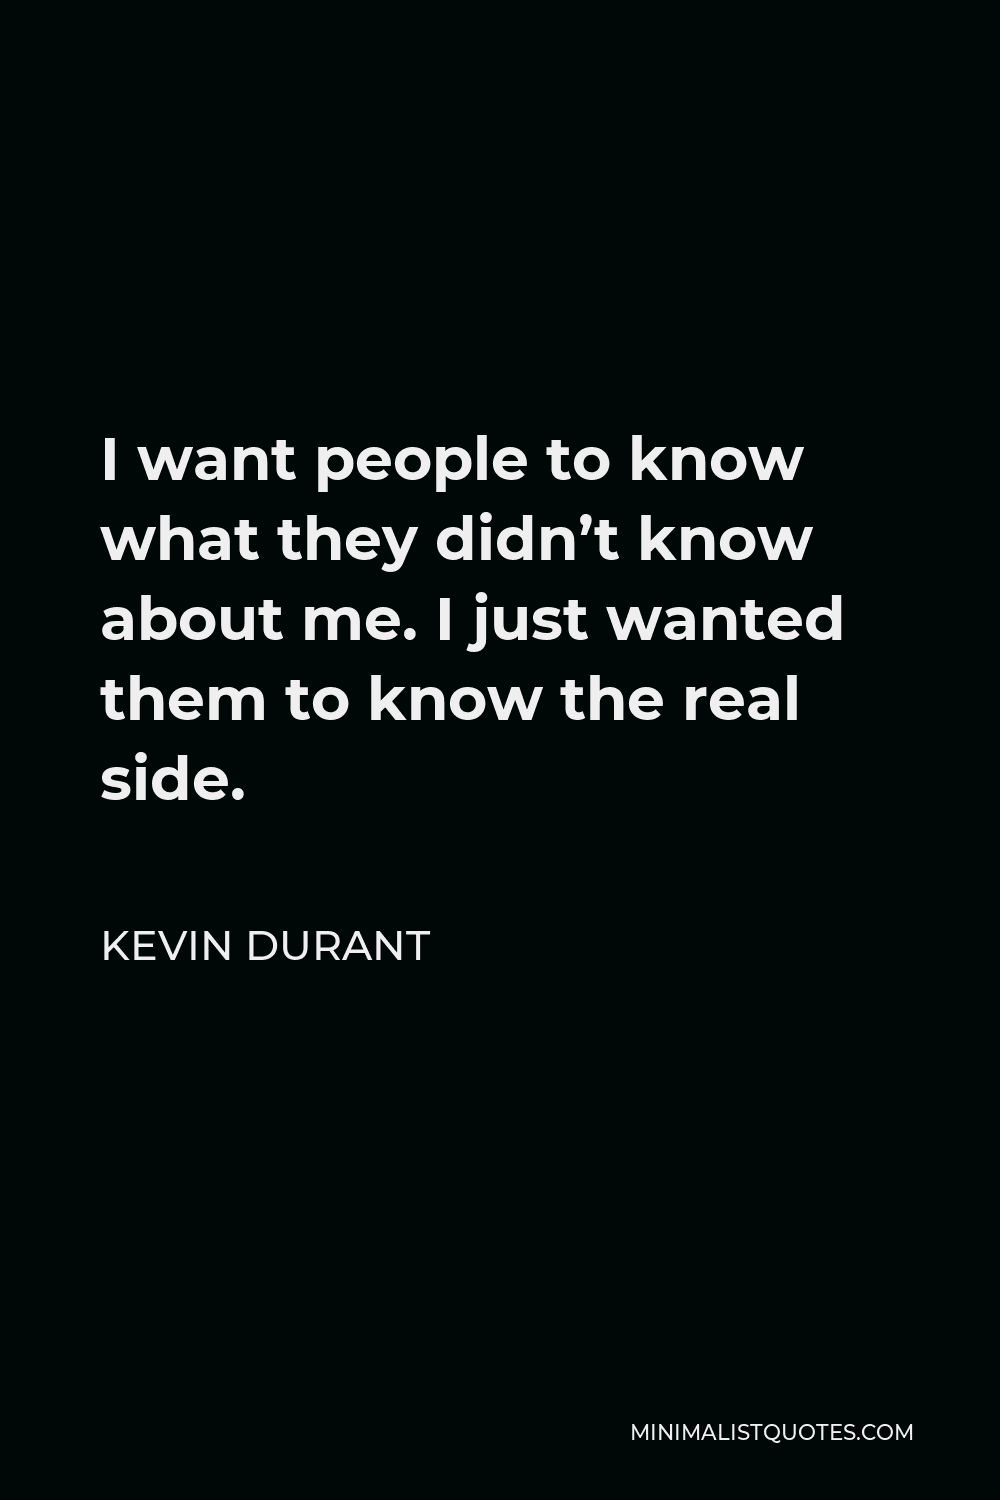 Kevin Durant Quote - I want people to know what they didn’t know about me. I just wanted them to know the real side.